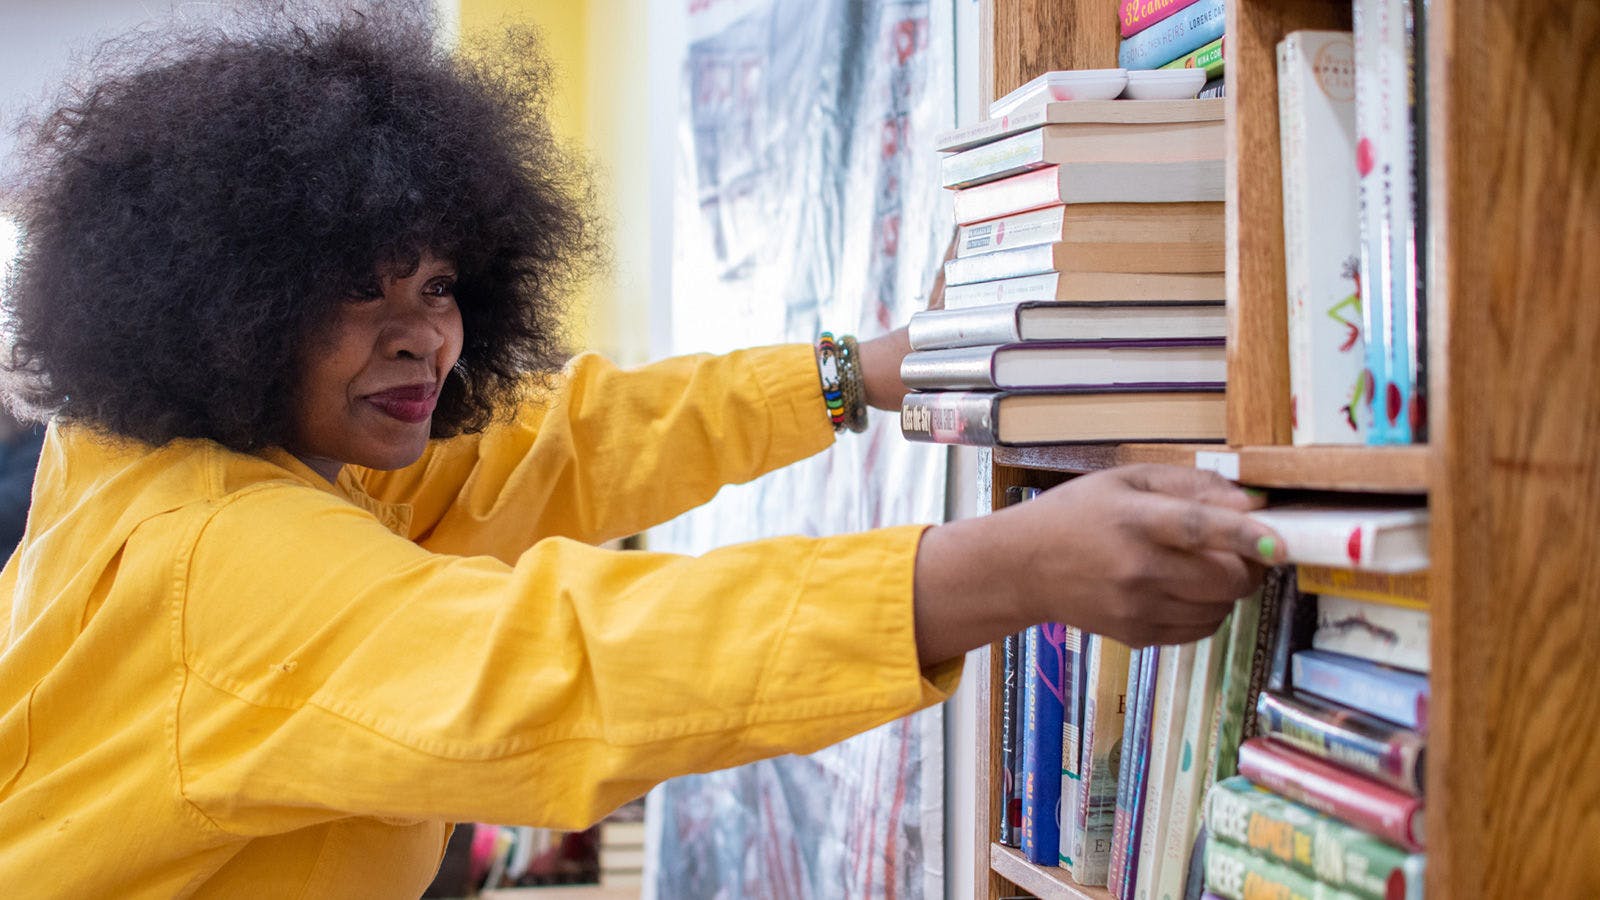 At left, a smiling woman in a yellow jacket reaches out with both hands towards a wooden bookshelf at right to retrieve a book. The shelves hold books both horizontally and vertically.